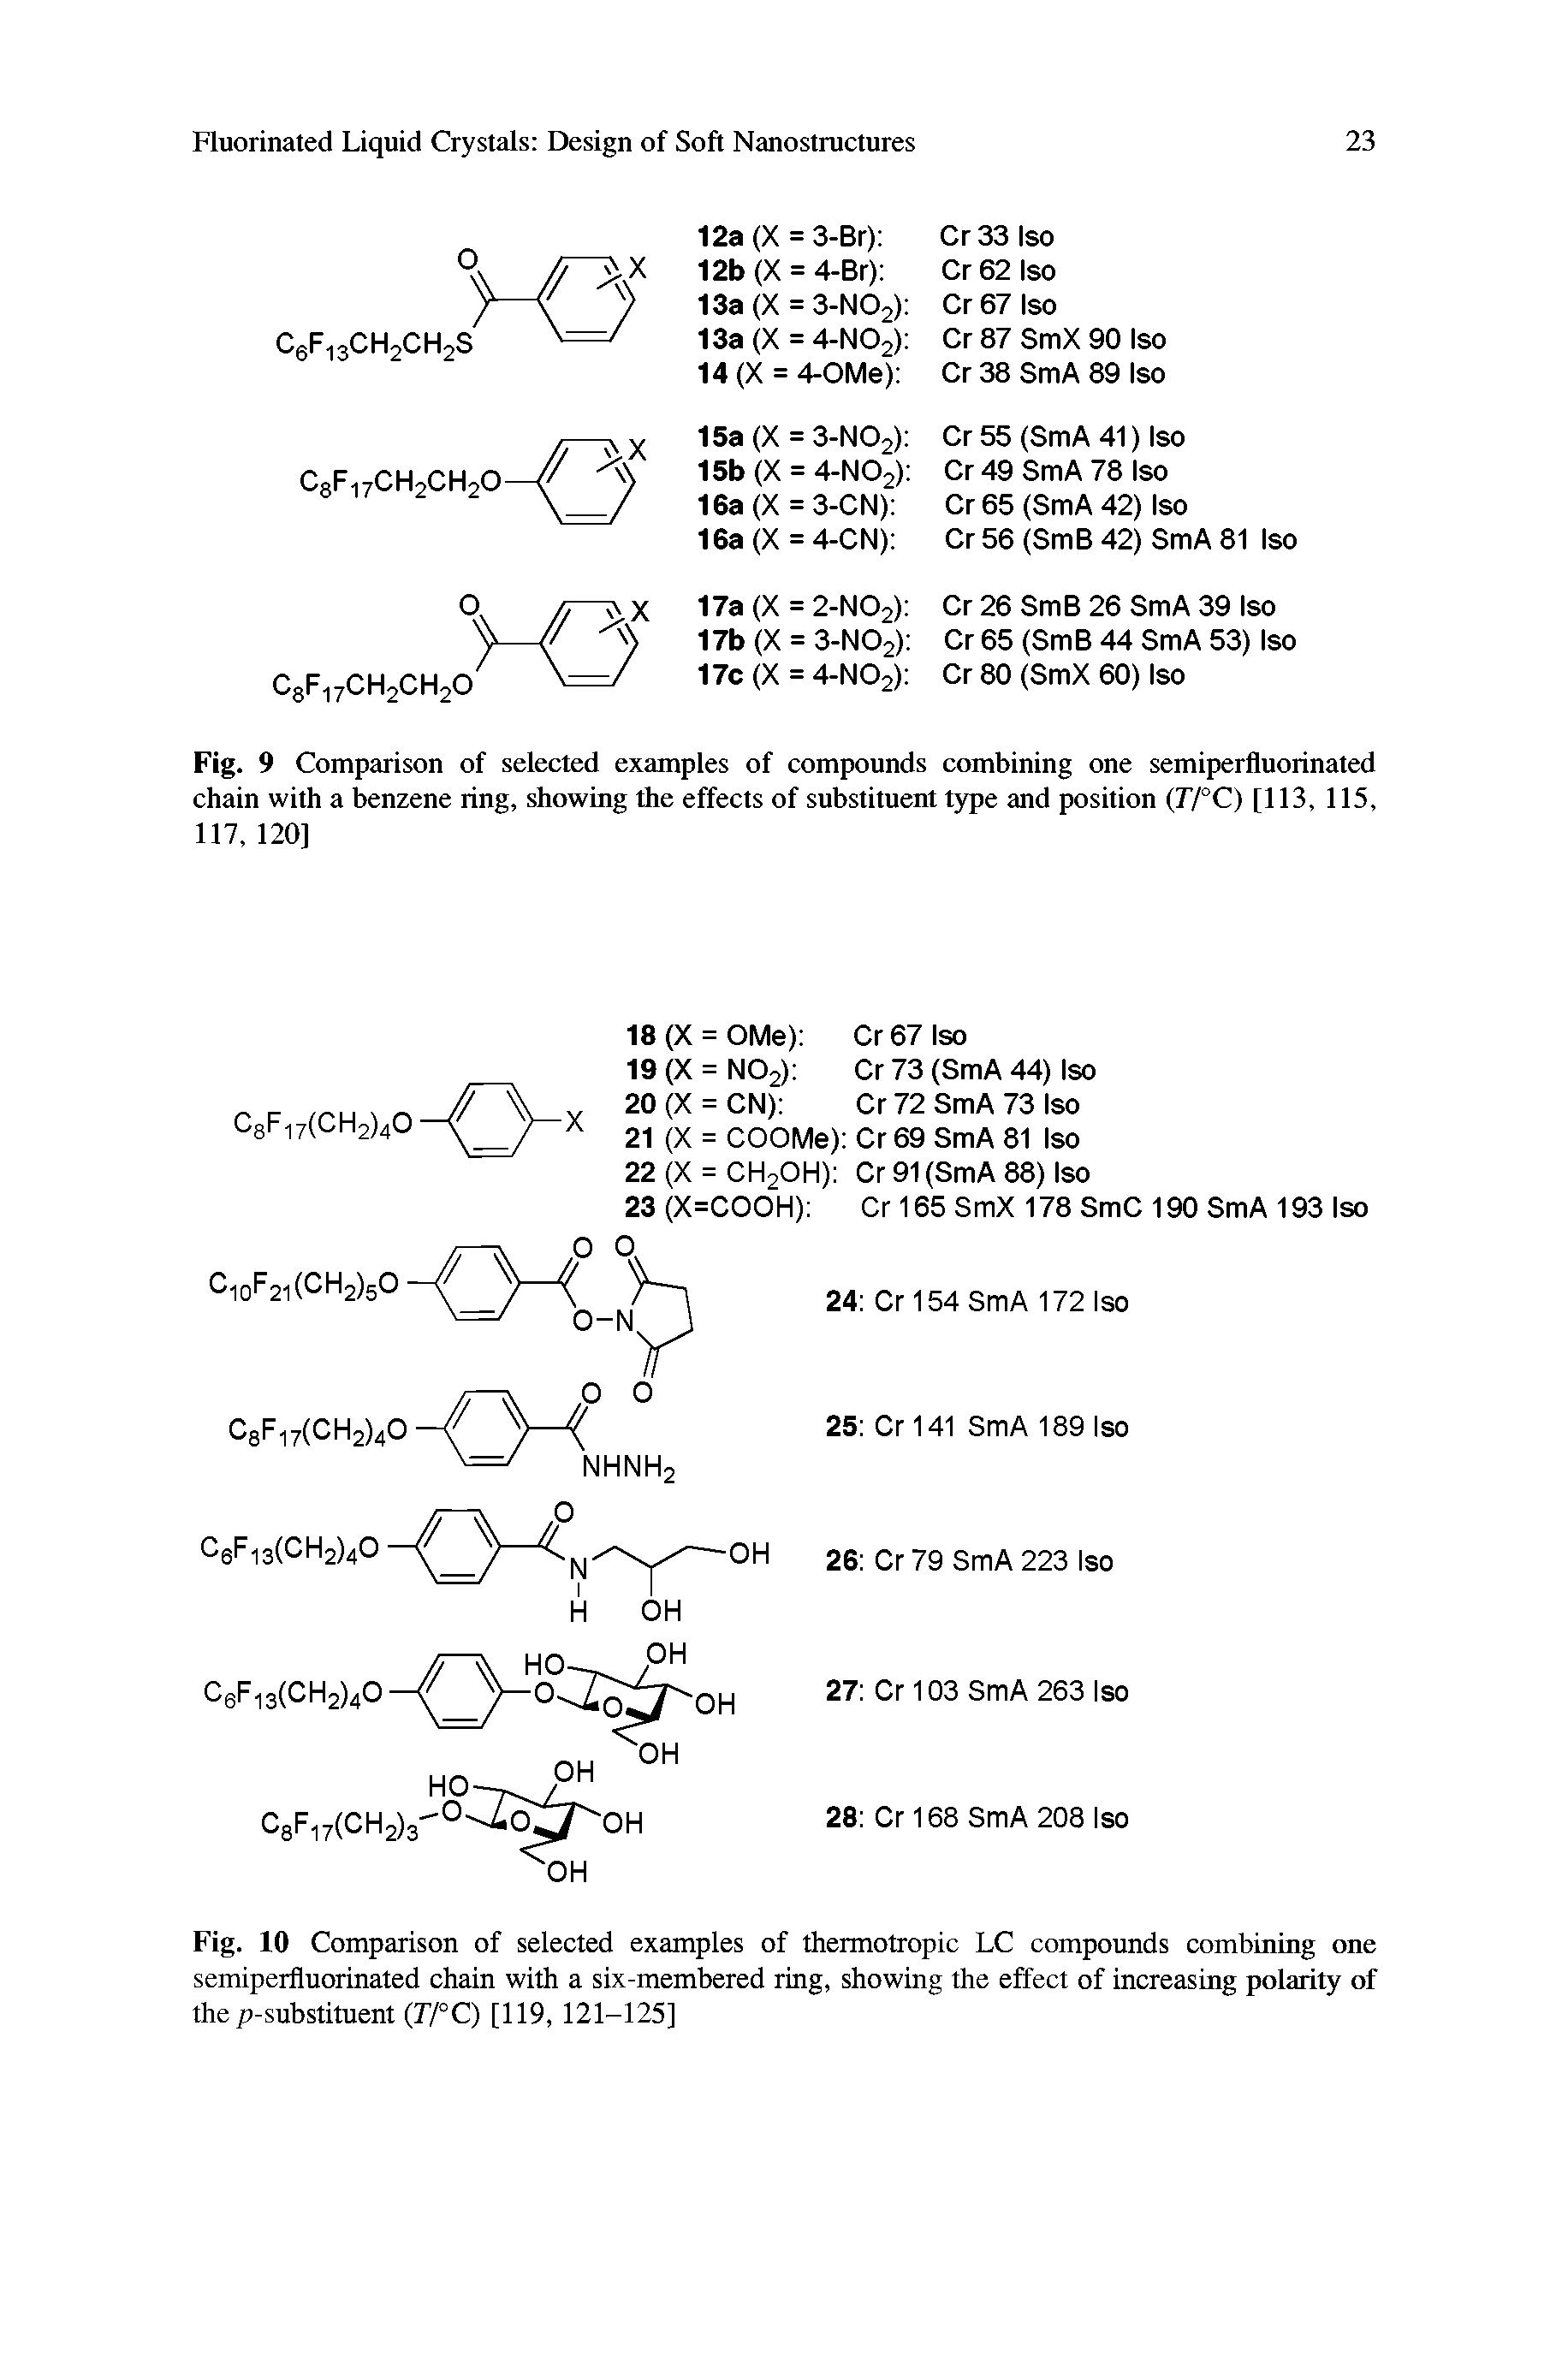 Fig. 9 Comparison of selected examples of compounds combining one semiperfluorinated chain with a benzene ring, showing the effects of substituent type and position (77°C) [113, 115, 117, 120]...